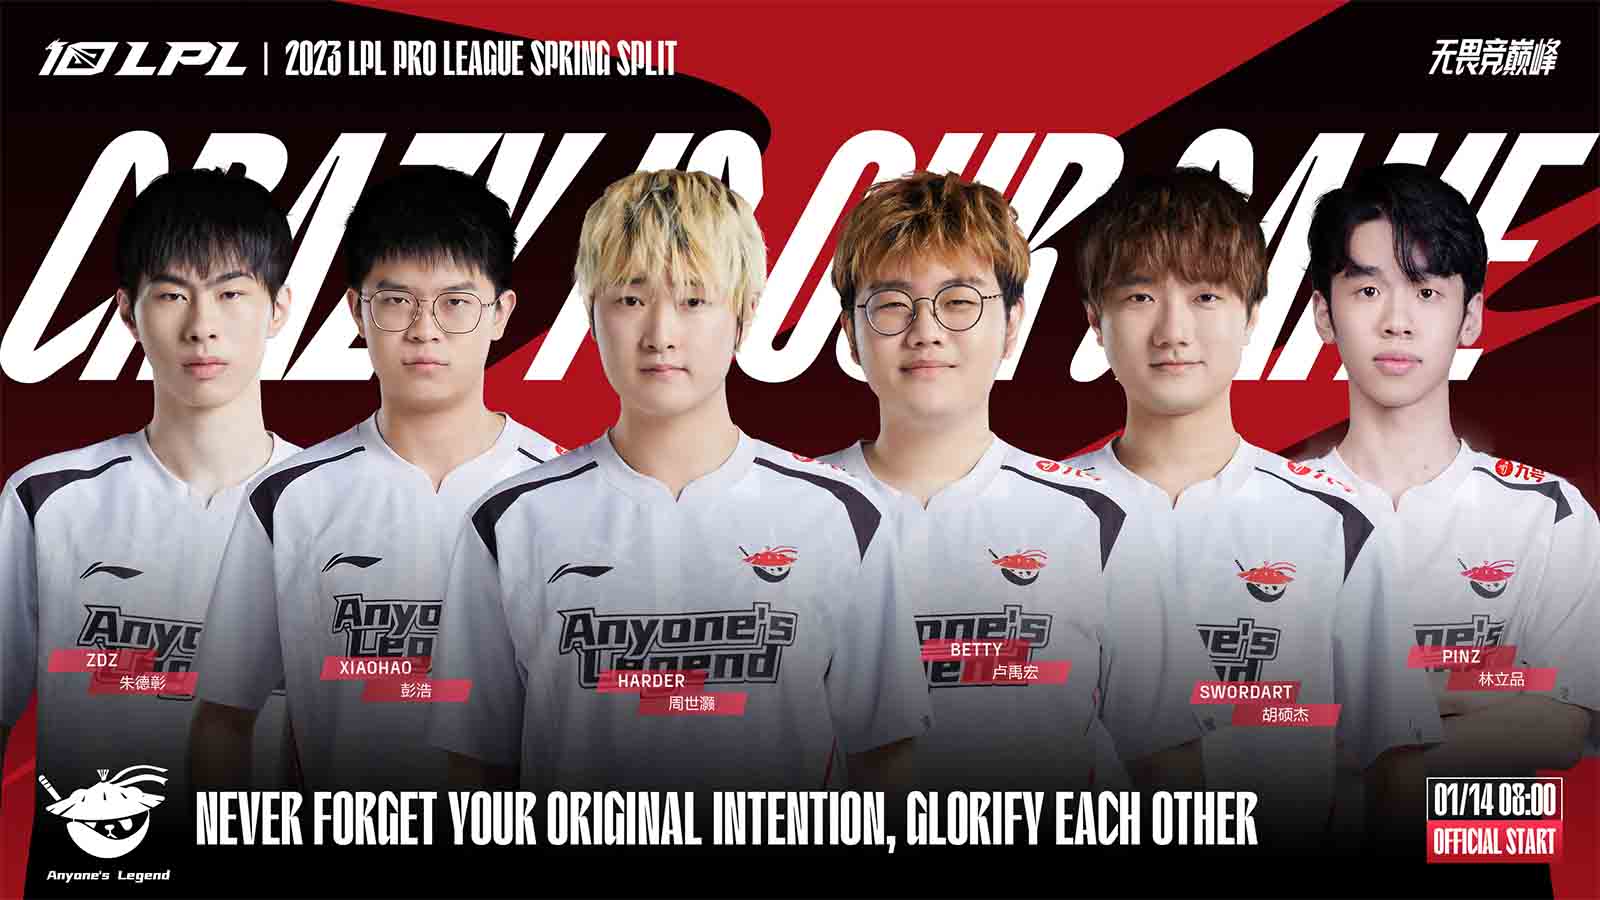 LPL Spring 2023 Full roster of every team competing ONE Esports